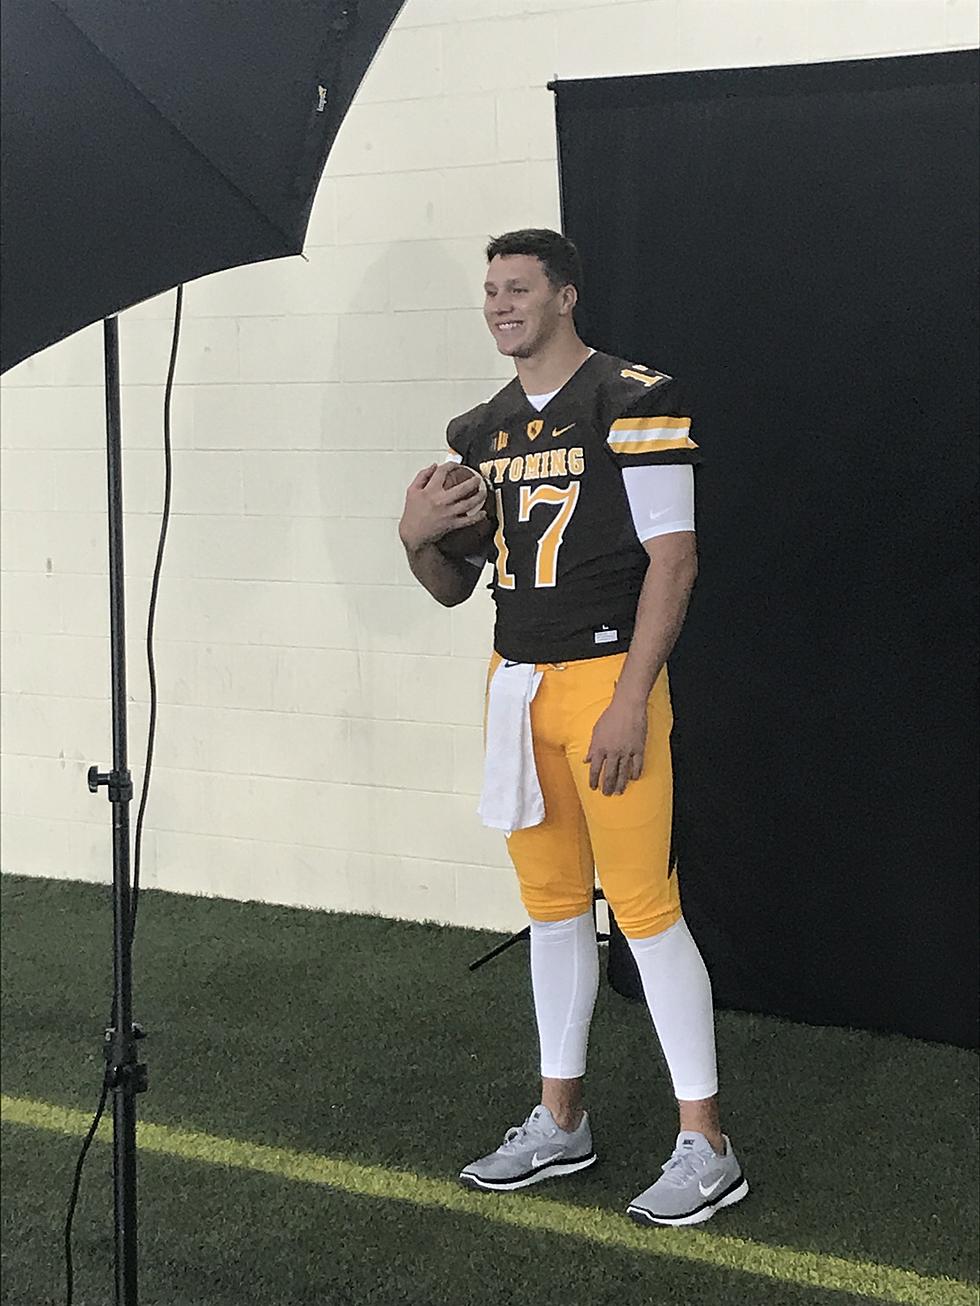 5 Things I Took Away From University of Wyoming Football Media Day